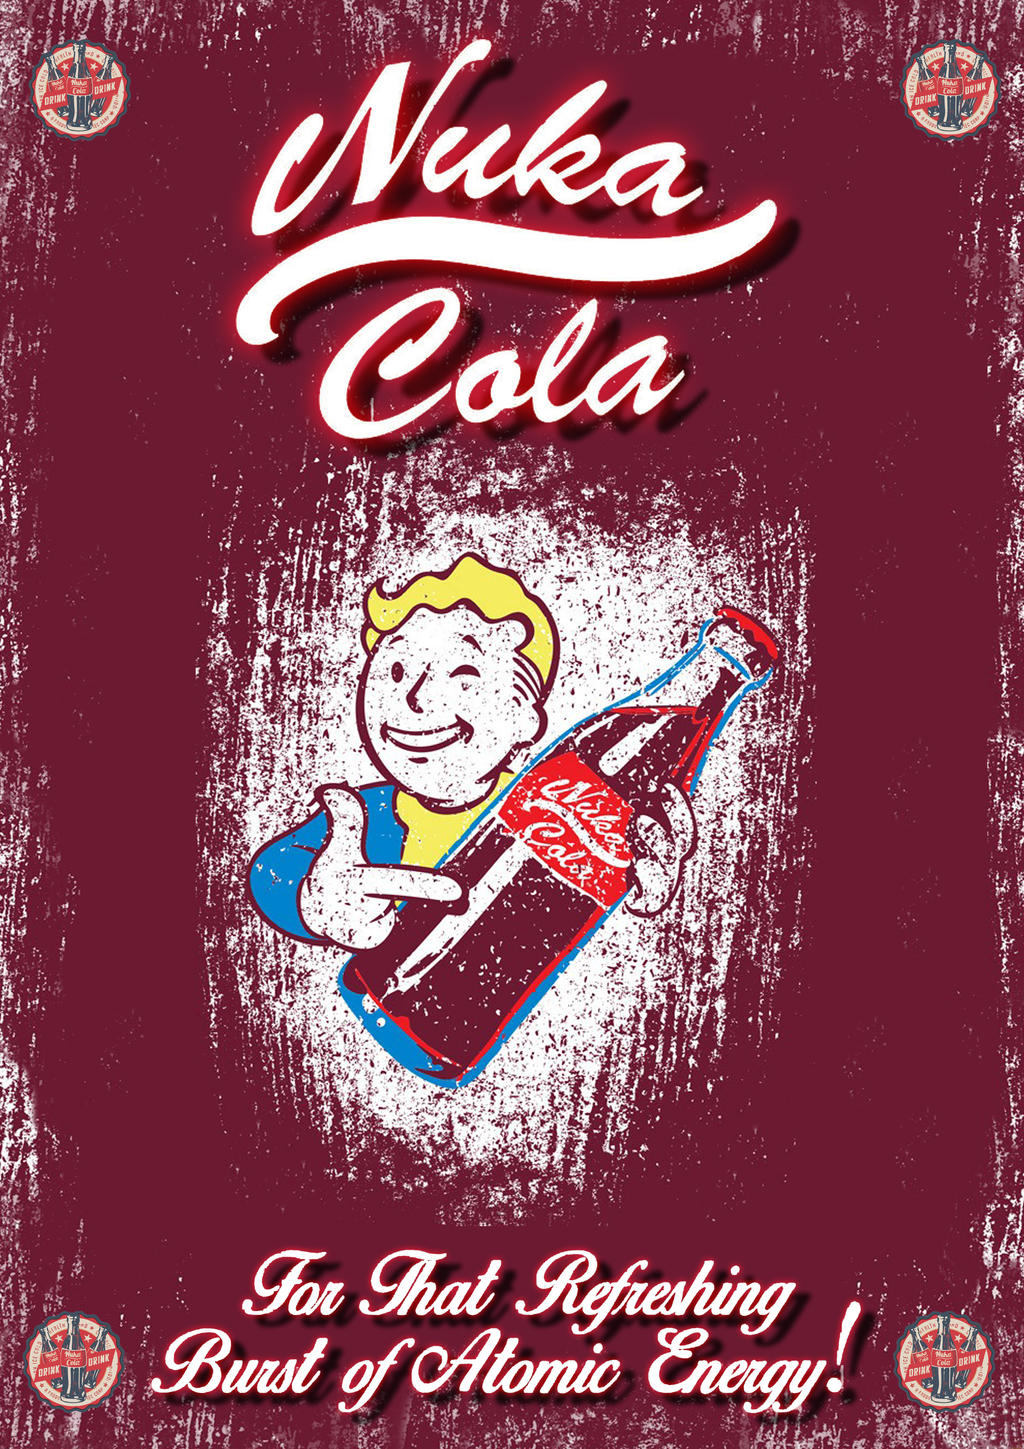 Nuka cola Wallpaper from Fallout by Zinogreon on DeviantArt